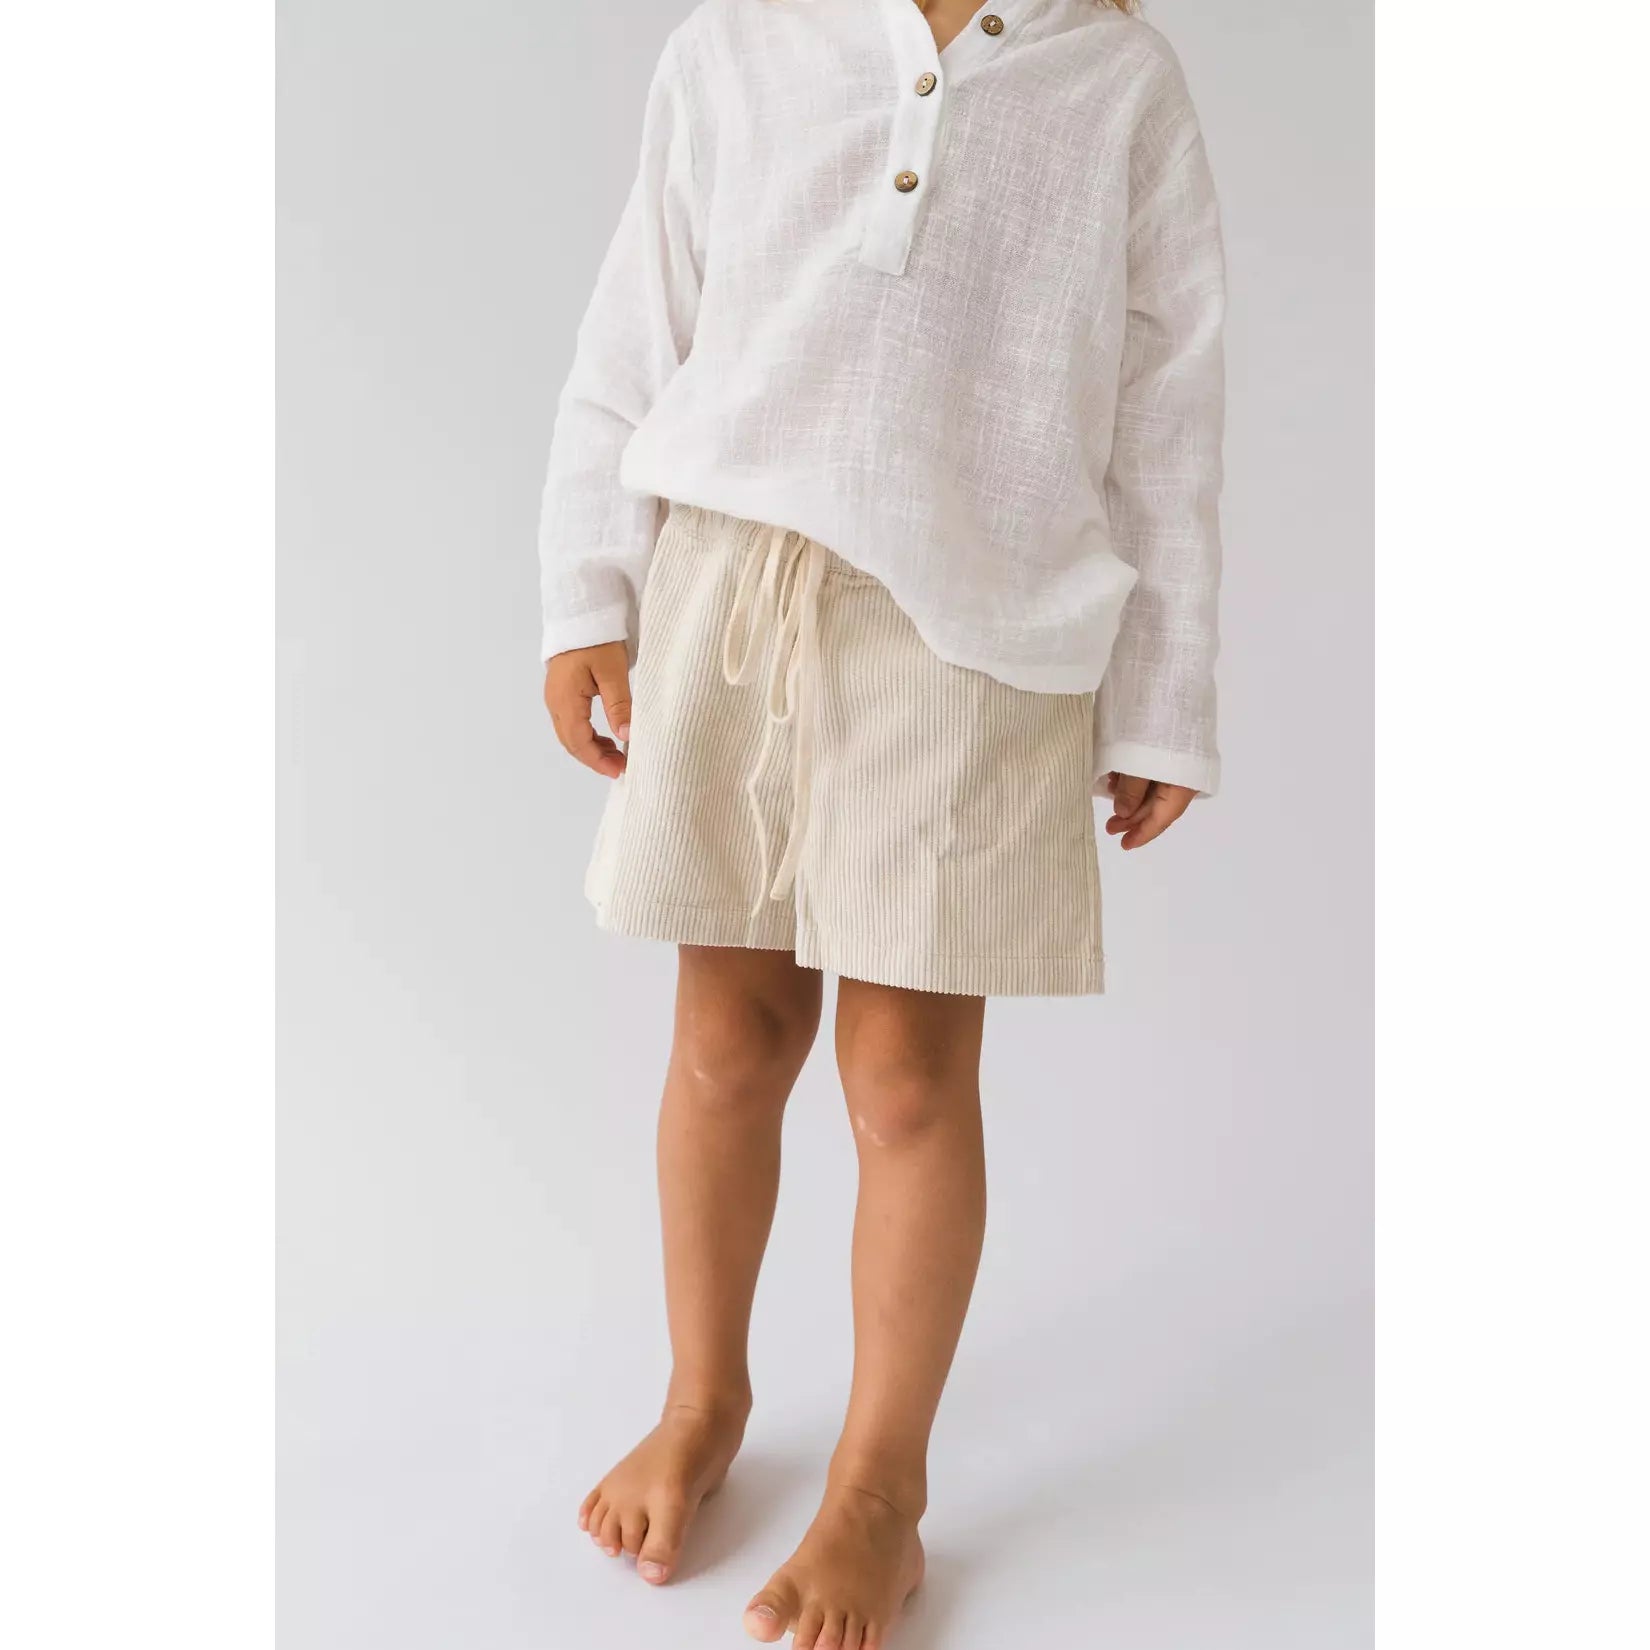 Illoura The Label Bowie Shorts - Natural Cord